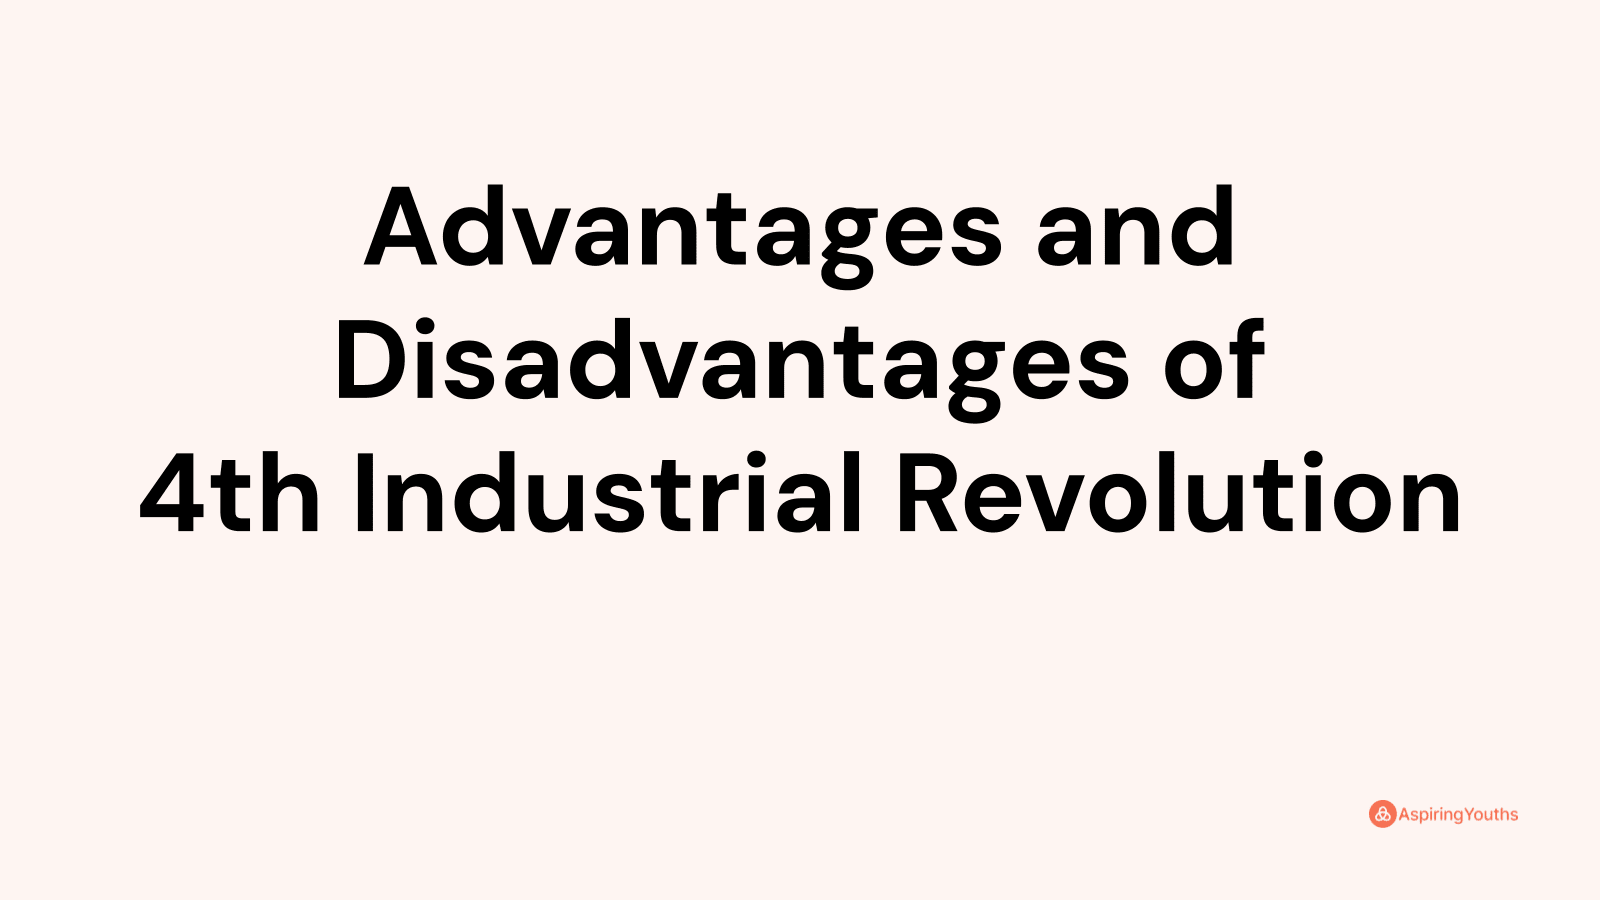 Advantages and disadvantages of 4th Industrial Revolution